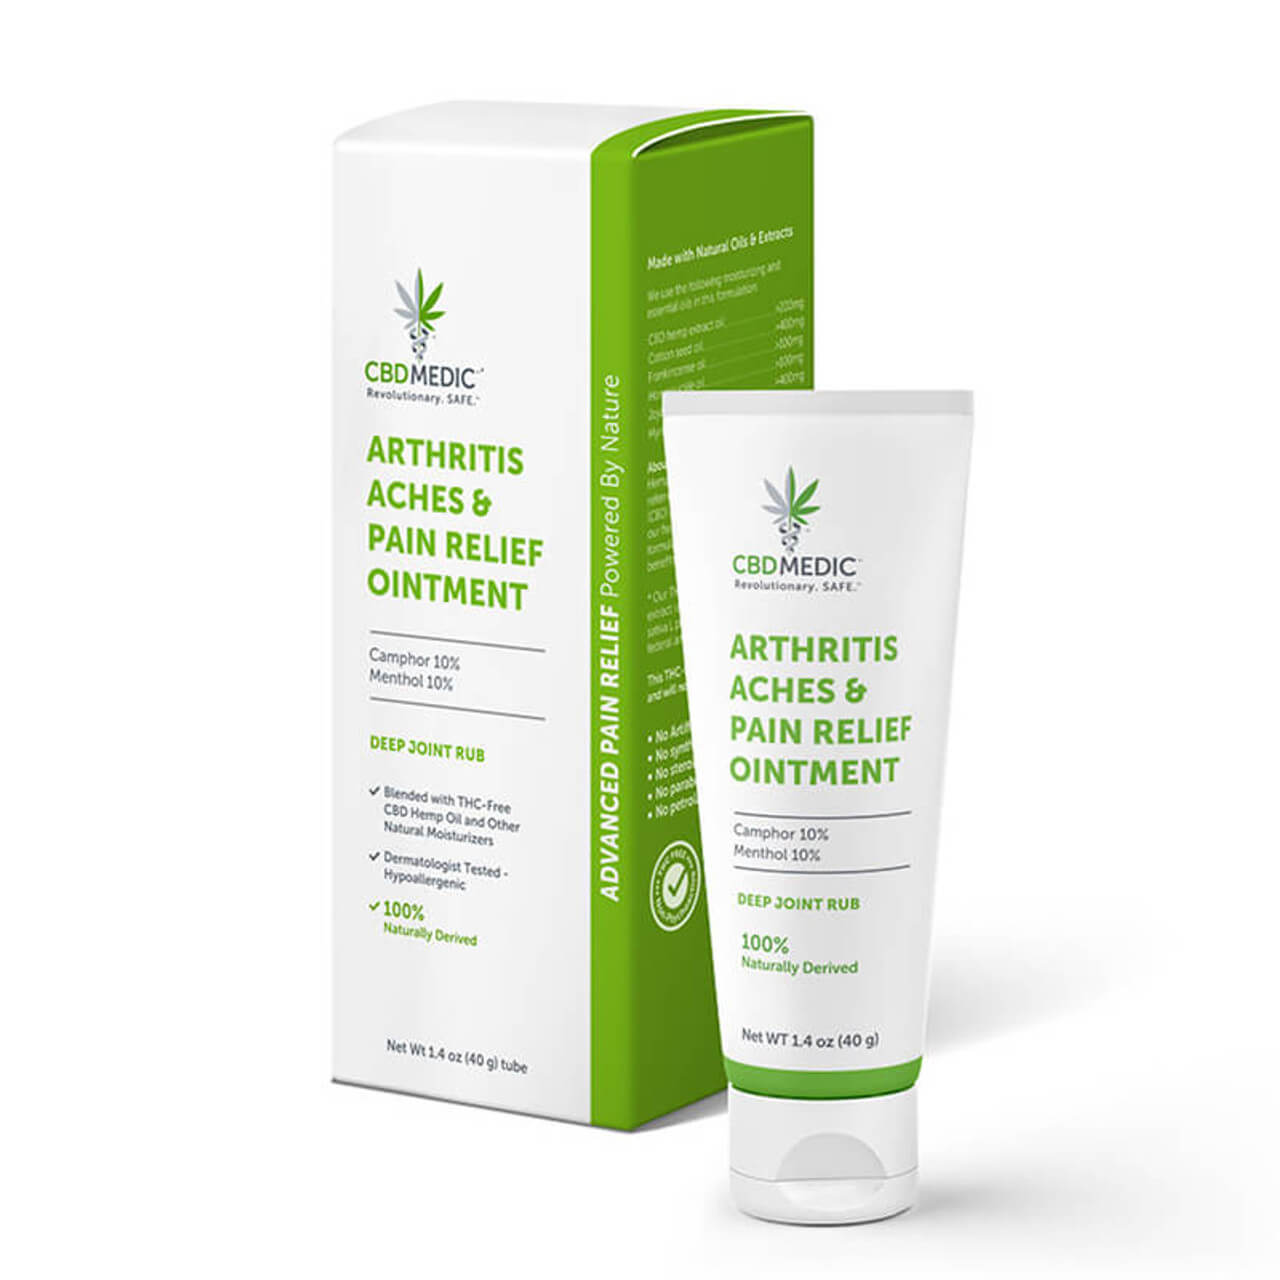 Arthritis Aches and Pain Relief Ointment logo